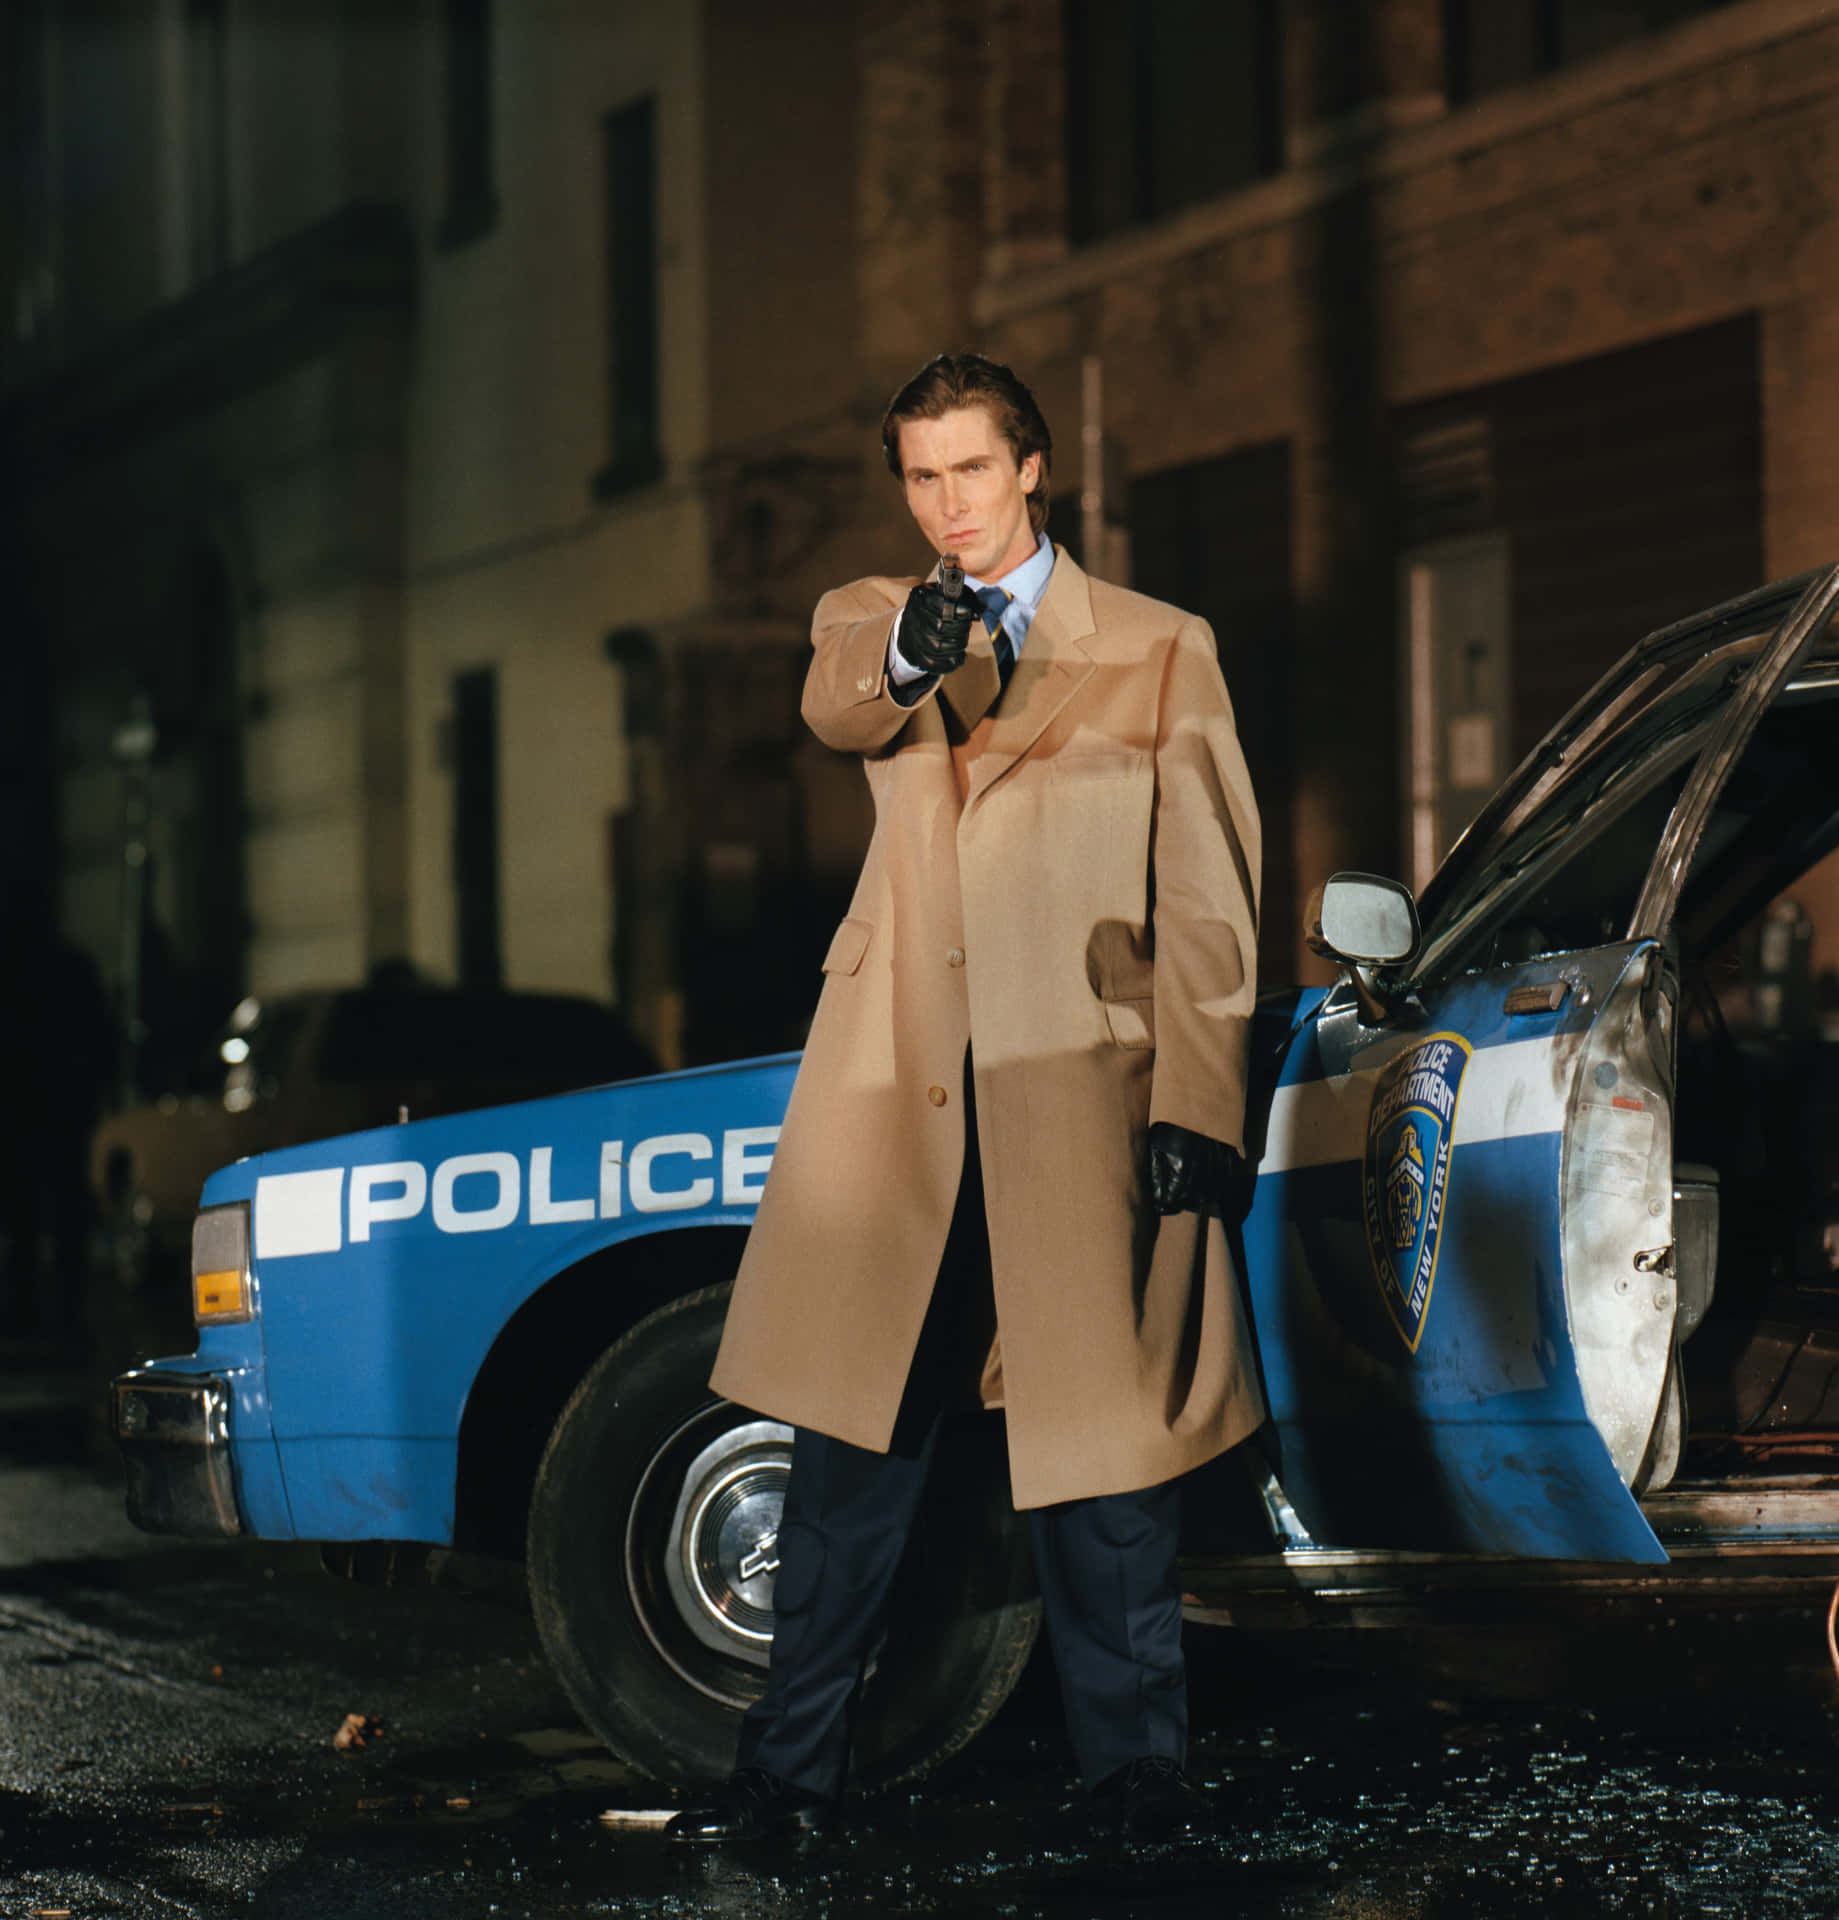 Manin Trench Coat Near Police Car Background